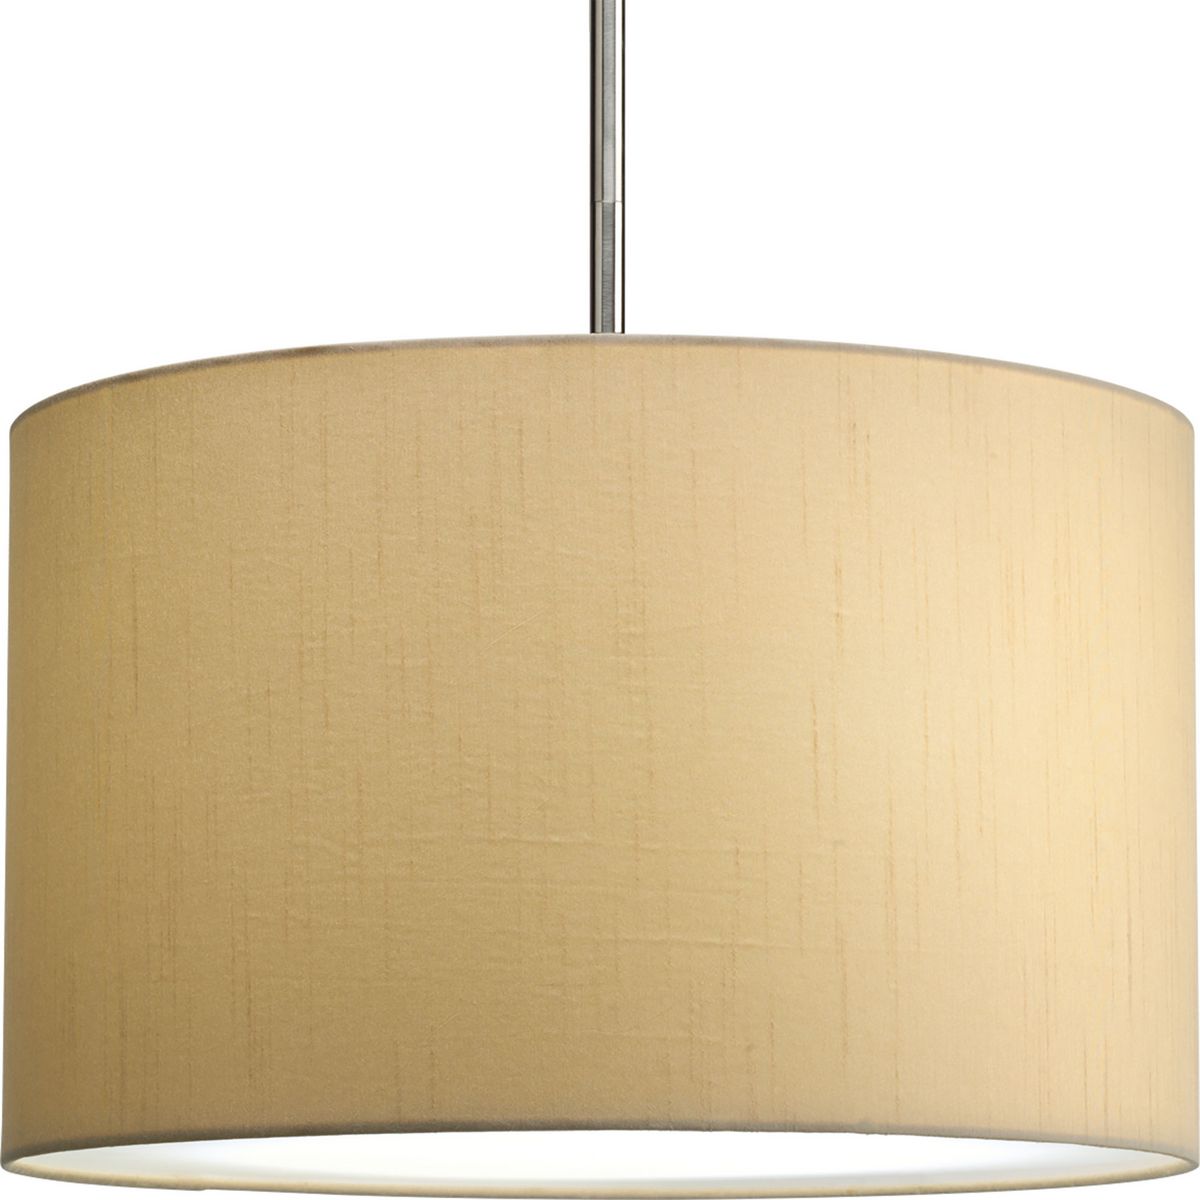 PROGRESS LIGHTING P8823-01 Beige Silk Markor Collection 16" Drum Shade for Use with Markor Pendant Kit